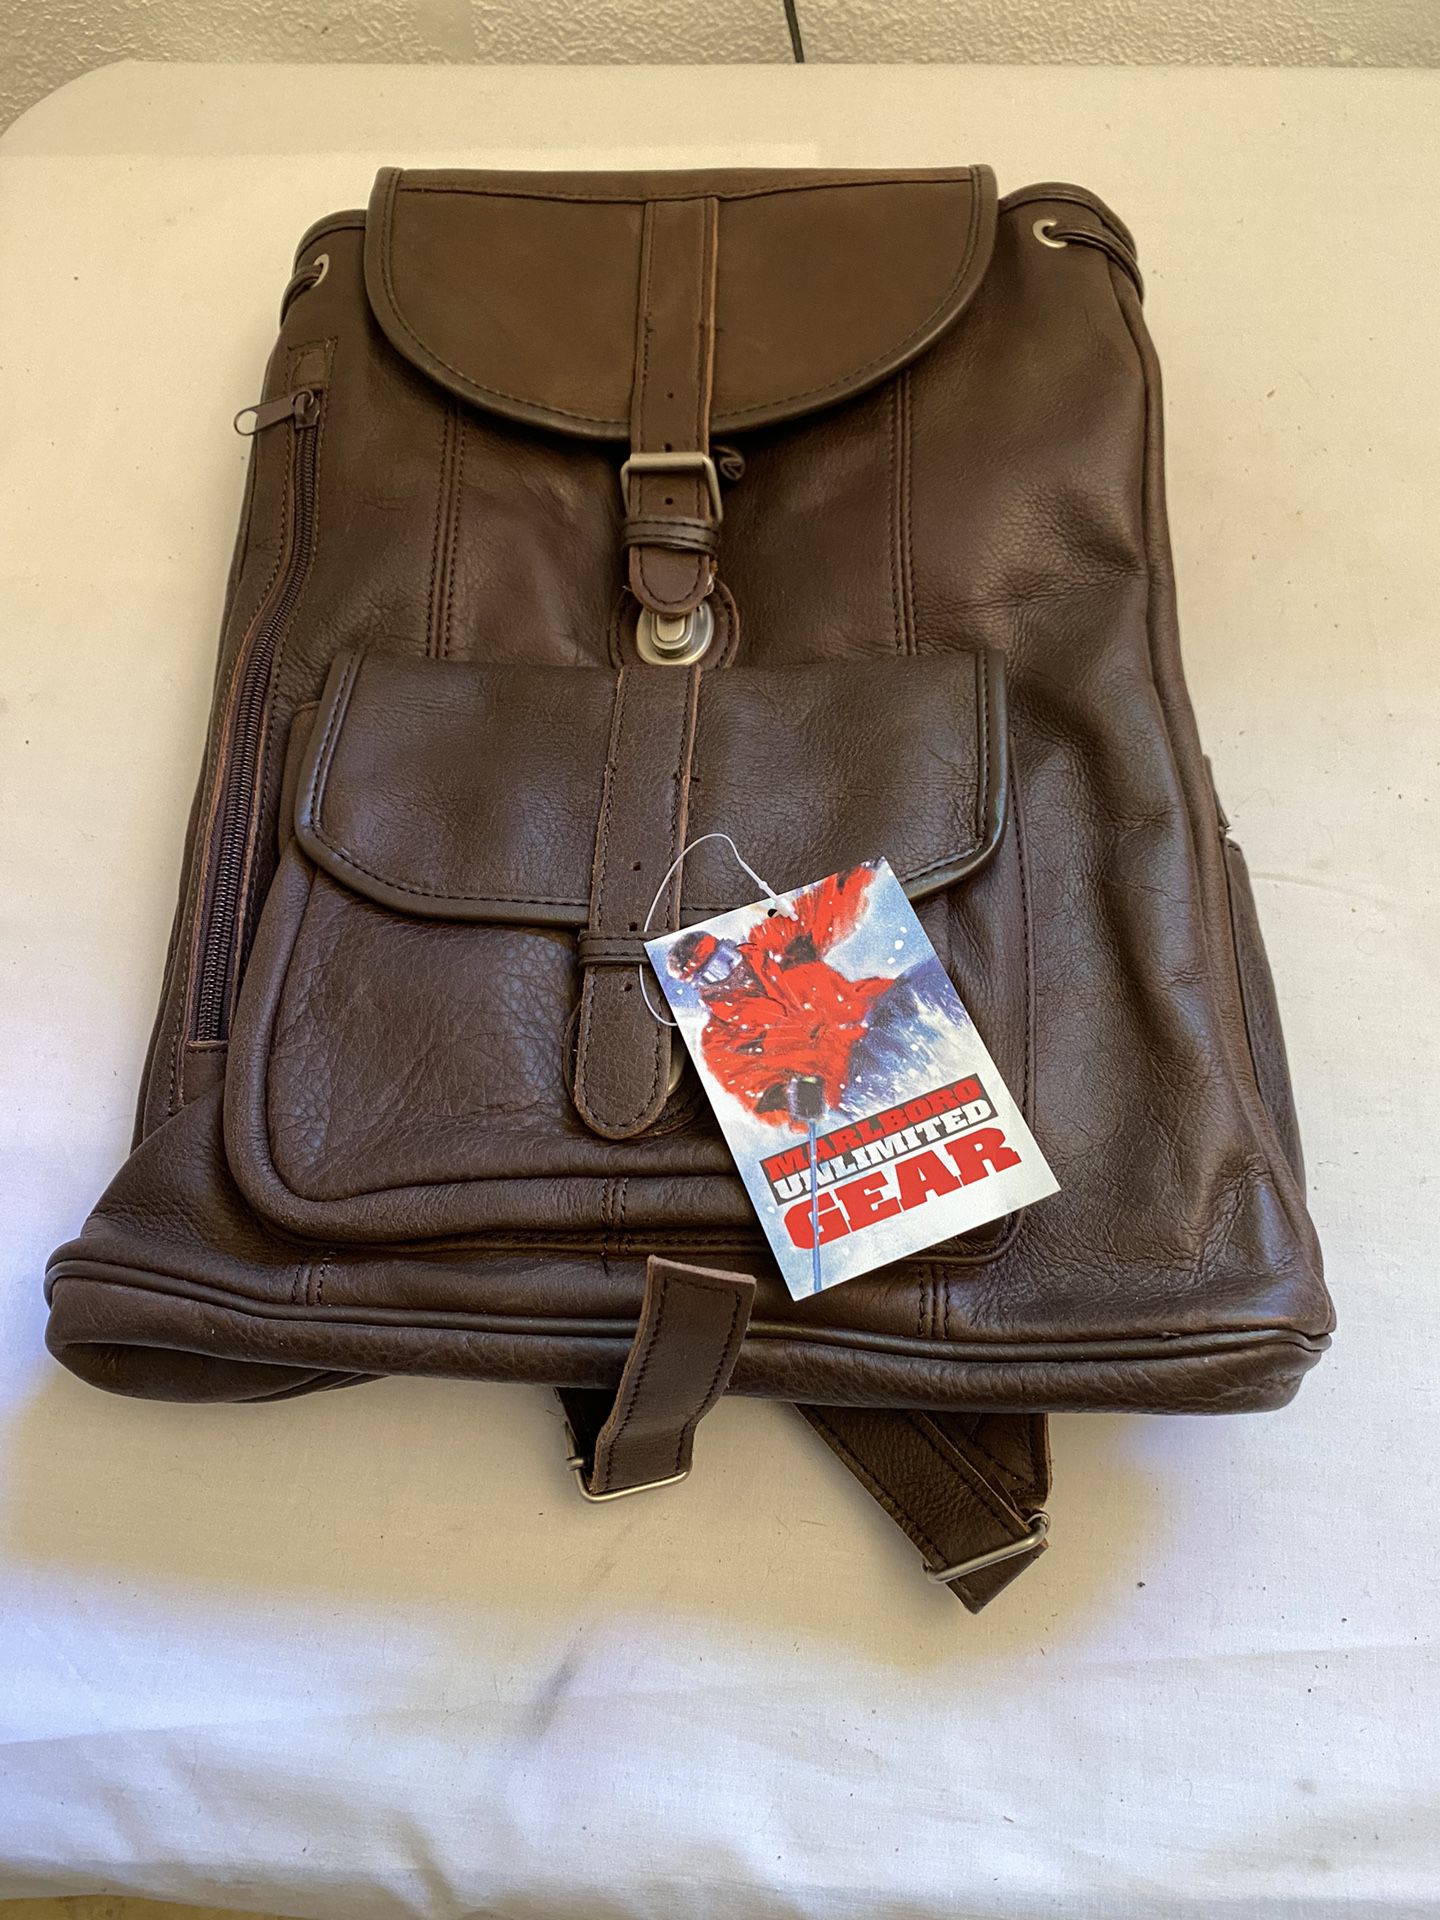 Marlboro limited edition all leather large backpack (brand new $